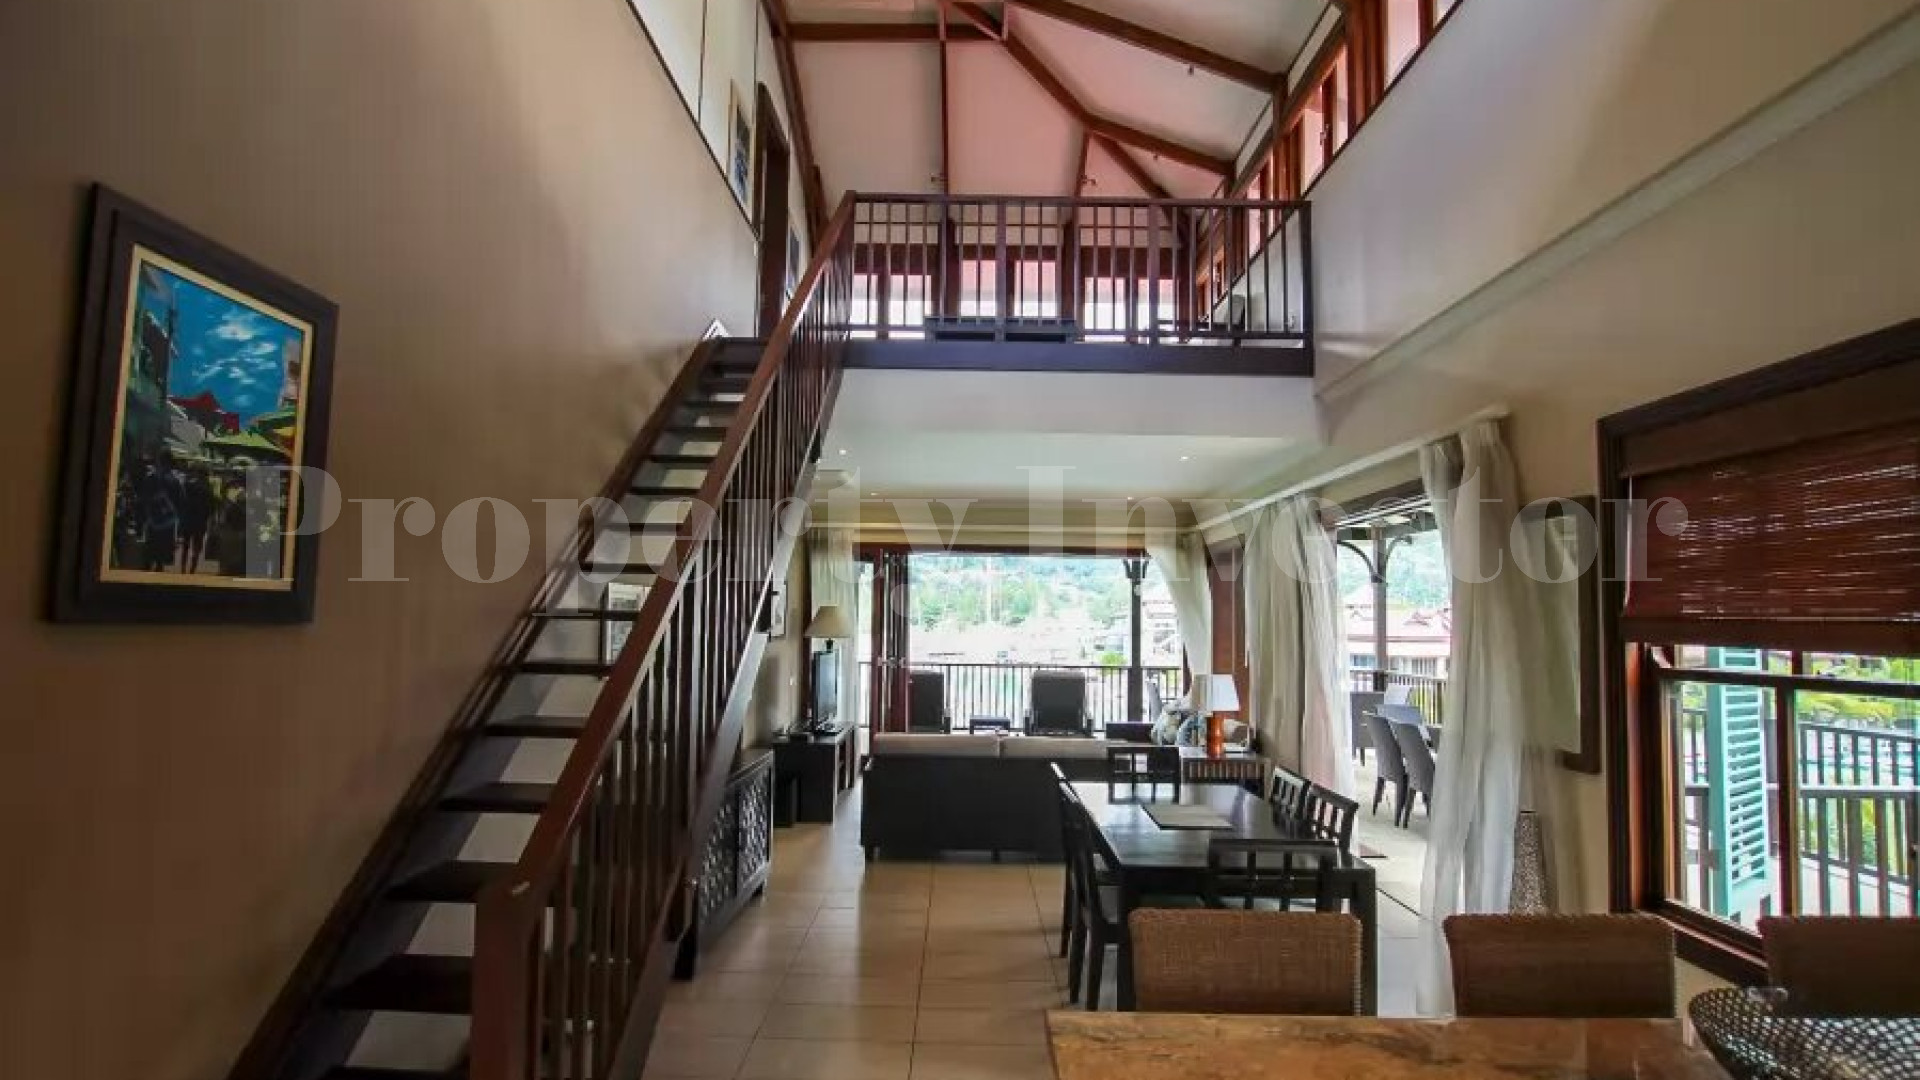 Beautiful 3 Bedroom Luxury Penthouse Apartment with Amazing Balconies for Sale on Eden Island, Seychelles